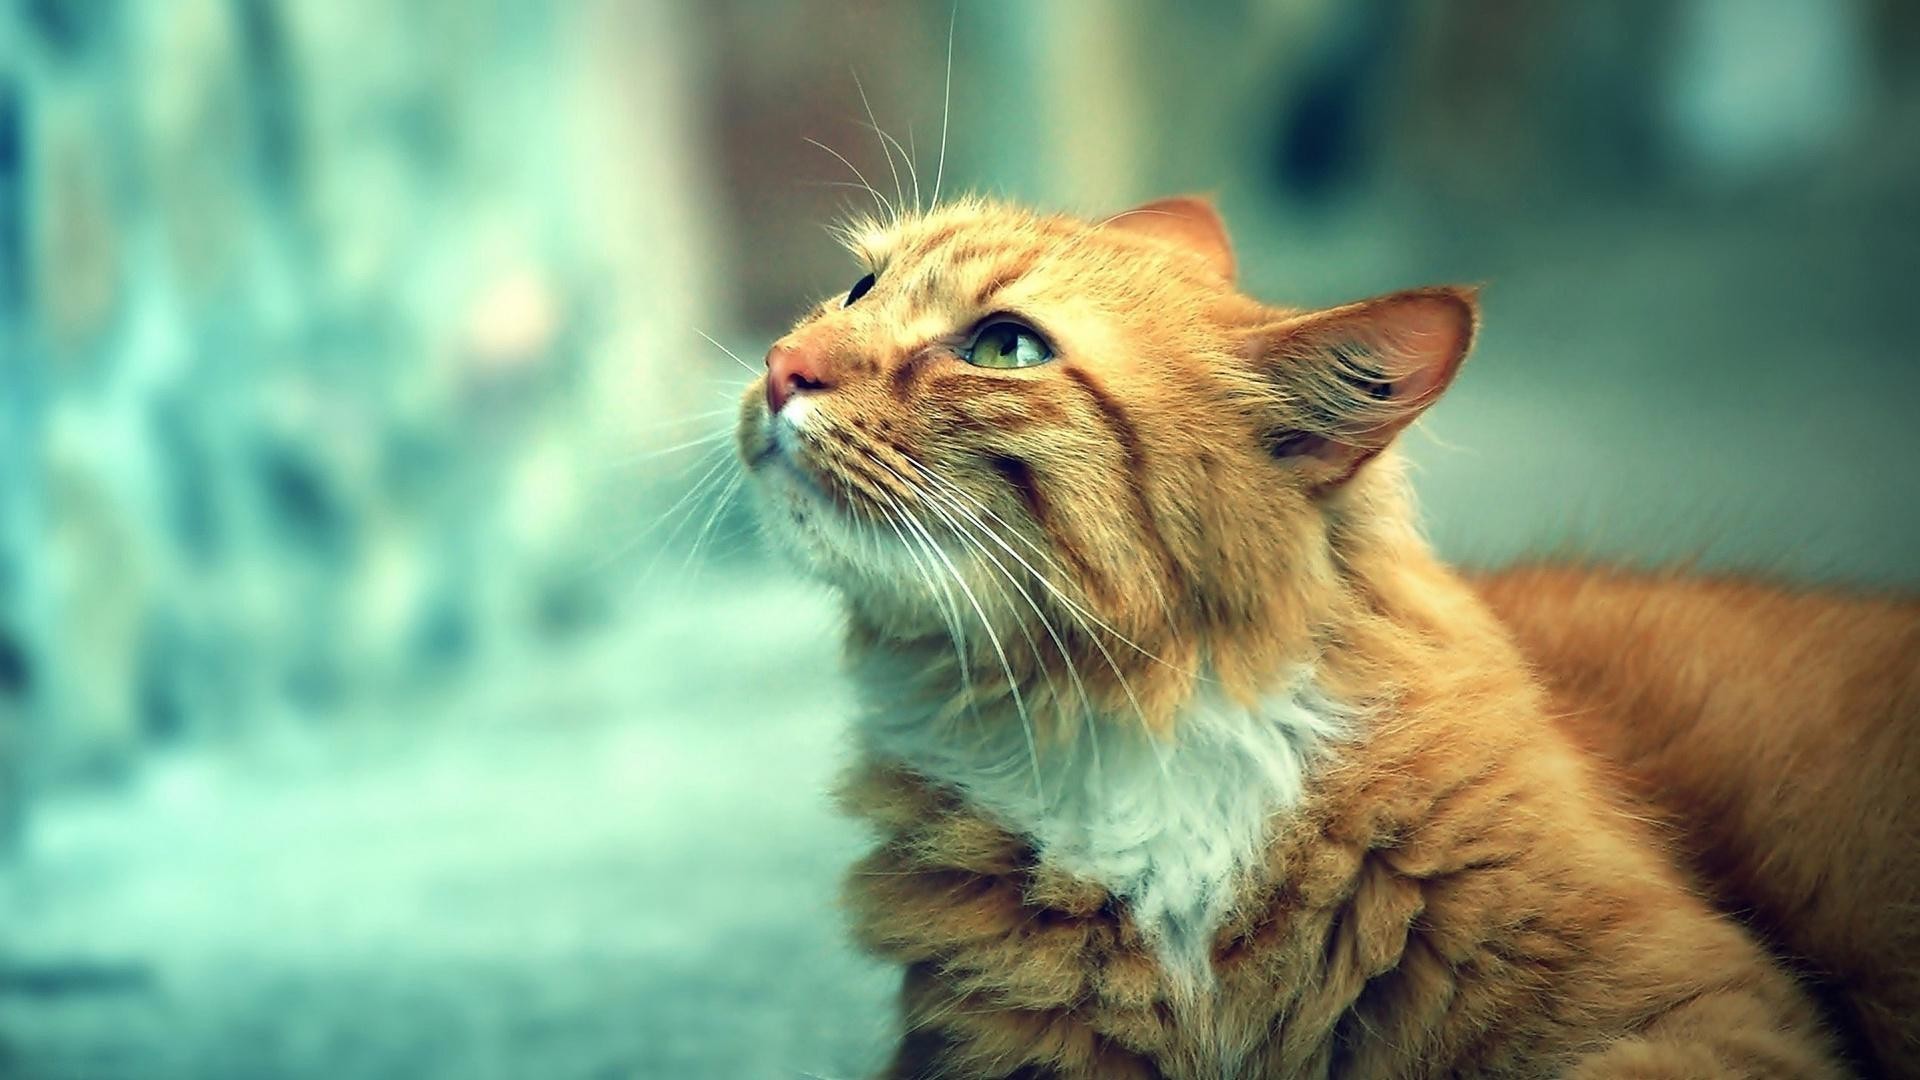 General 1920x1080 cats animals looking up whiskers fur tabby mammals green eyes